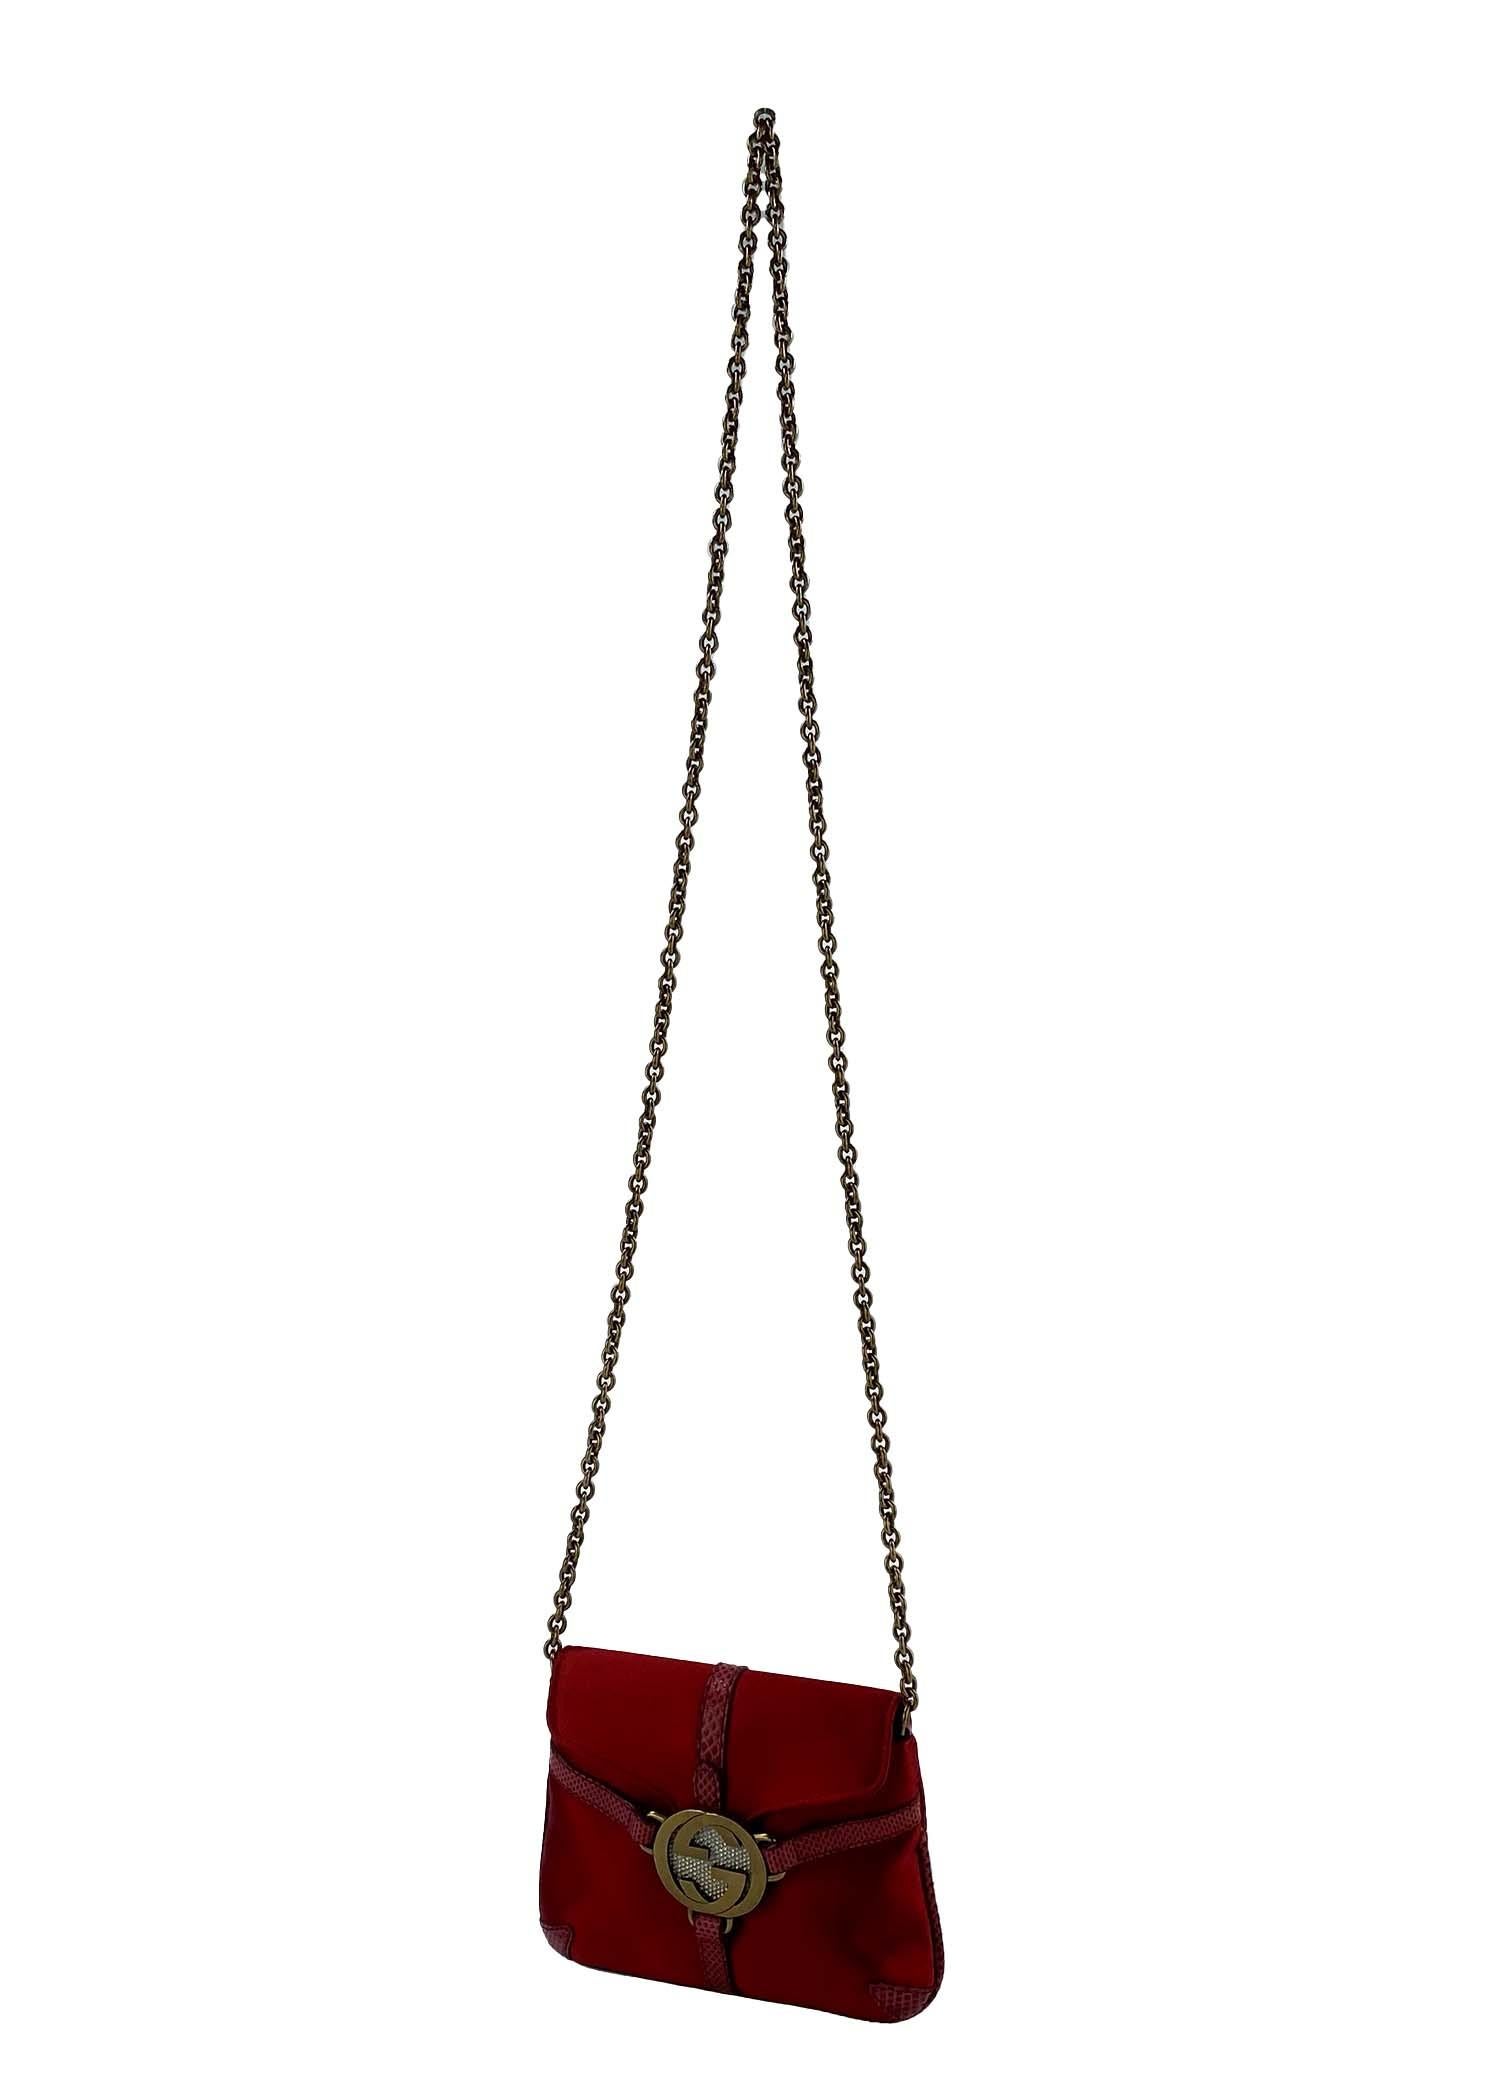 TheRealList presents: a rare red silk, rhinestone, and karung snakeskin mini reins crossbody bag by Tom Ford for Gucci. This early 2000's bag features a 'GG' accent at the front meant to emulate Ford's infamous Gucci 'GG' thongs from the